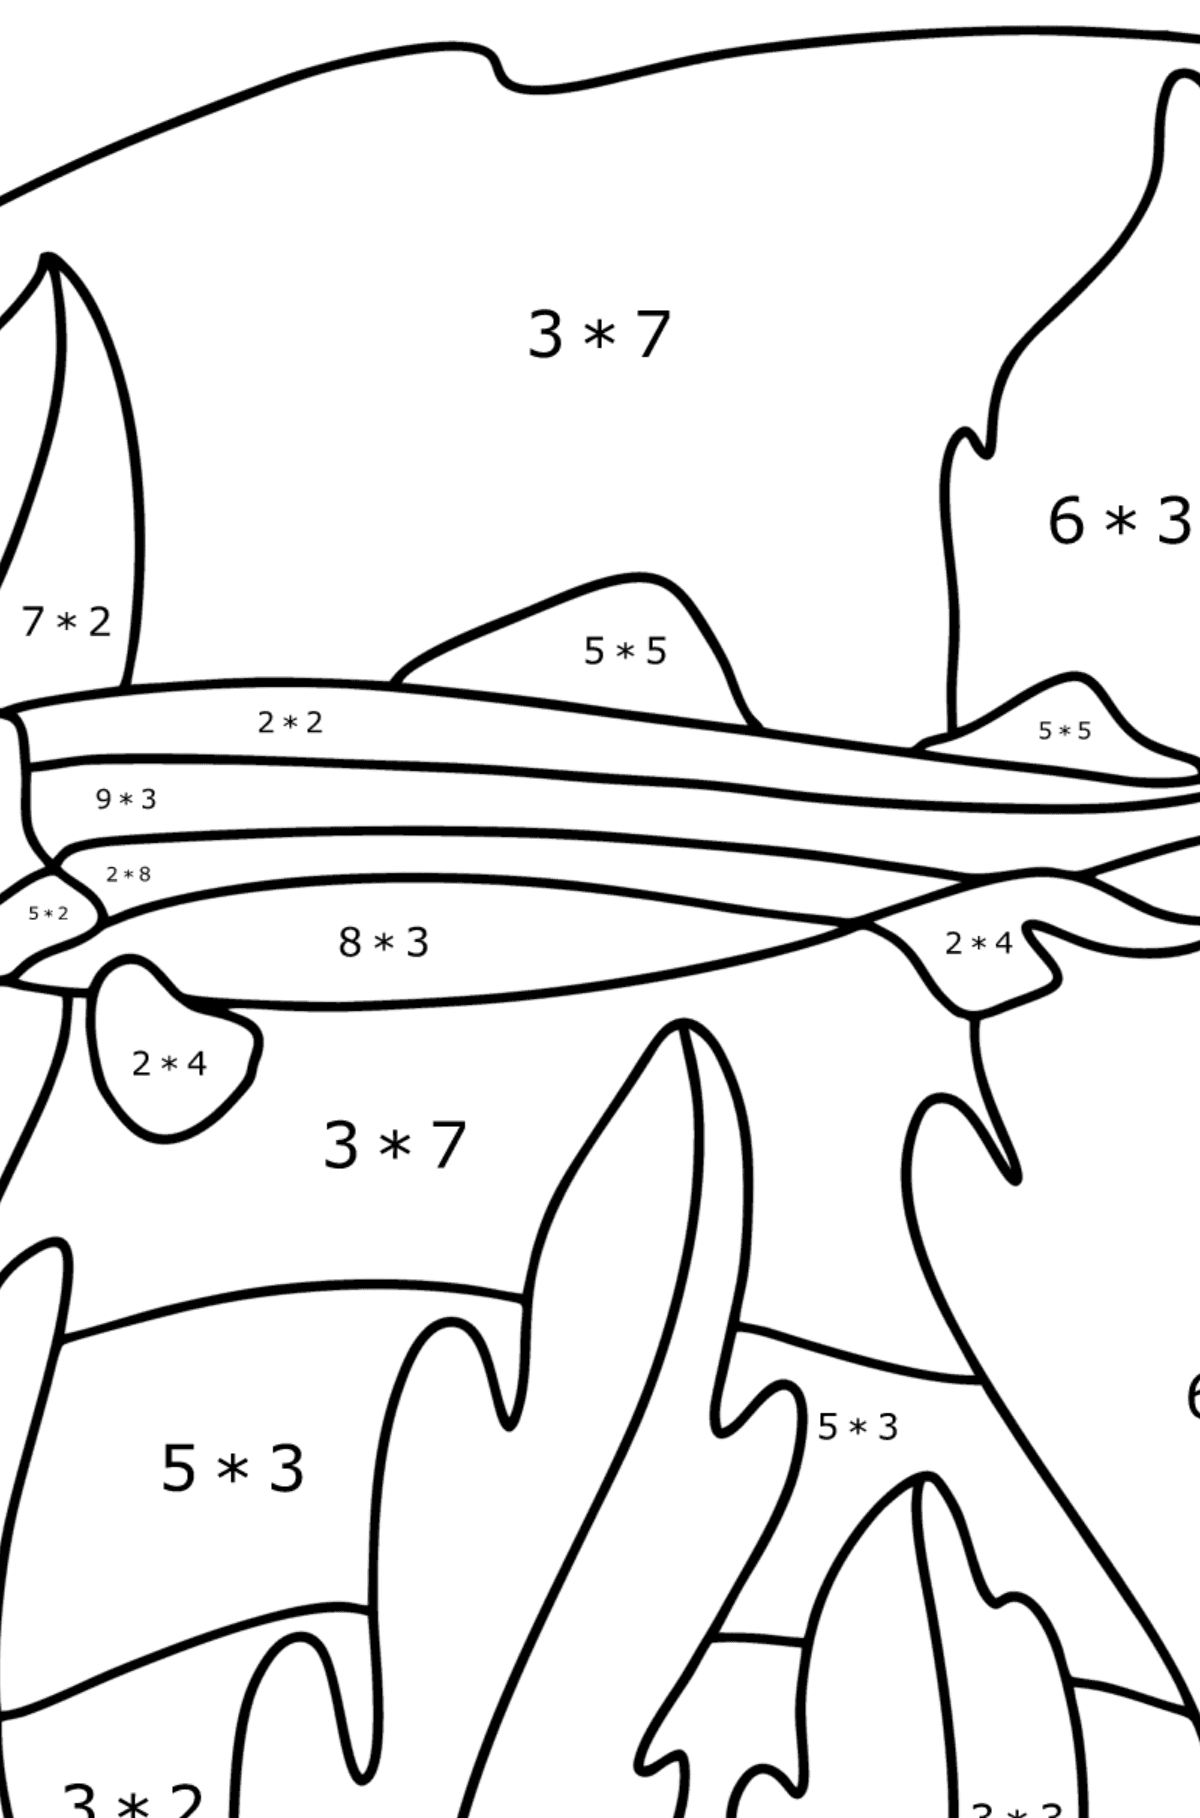 Crocodile Shark coloring page - Math Coloring - Multiplication for Kids